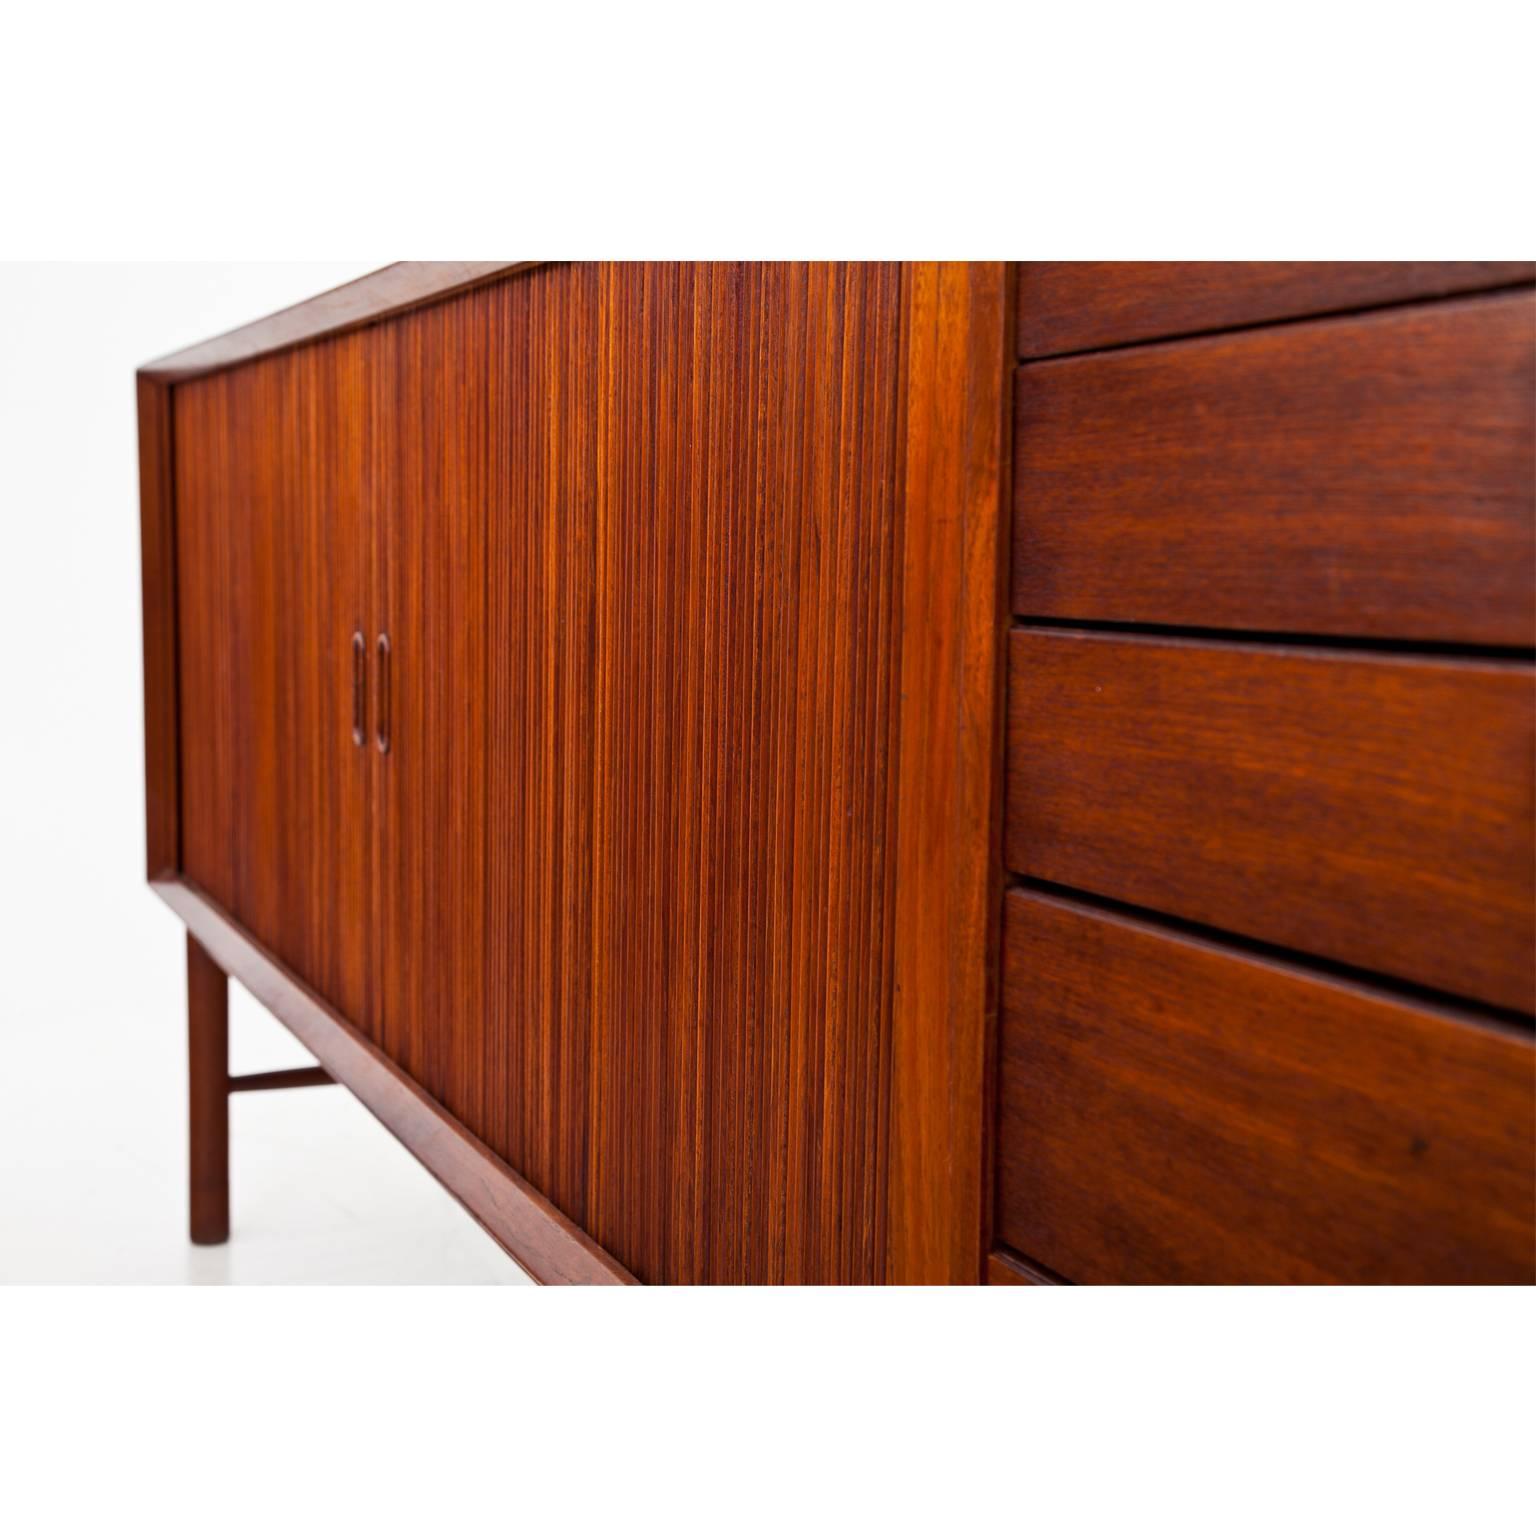 Long sideboard standing on round feet. The rectangular body has two sliding doors and five-drawers in the style of the sideboards by Orla Mølgaard-Nielsen und Peter Hvidt from the 1950s. The sideboard is in a restored condition.